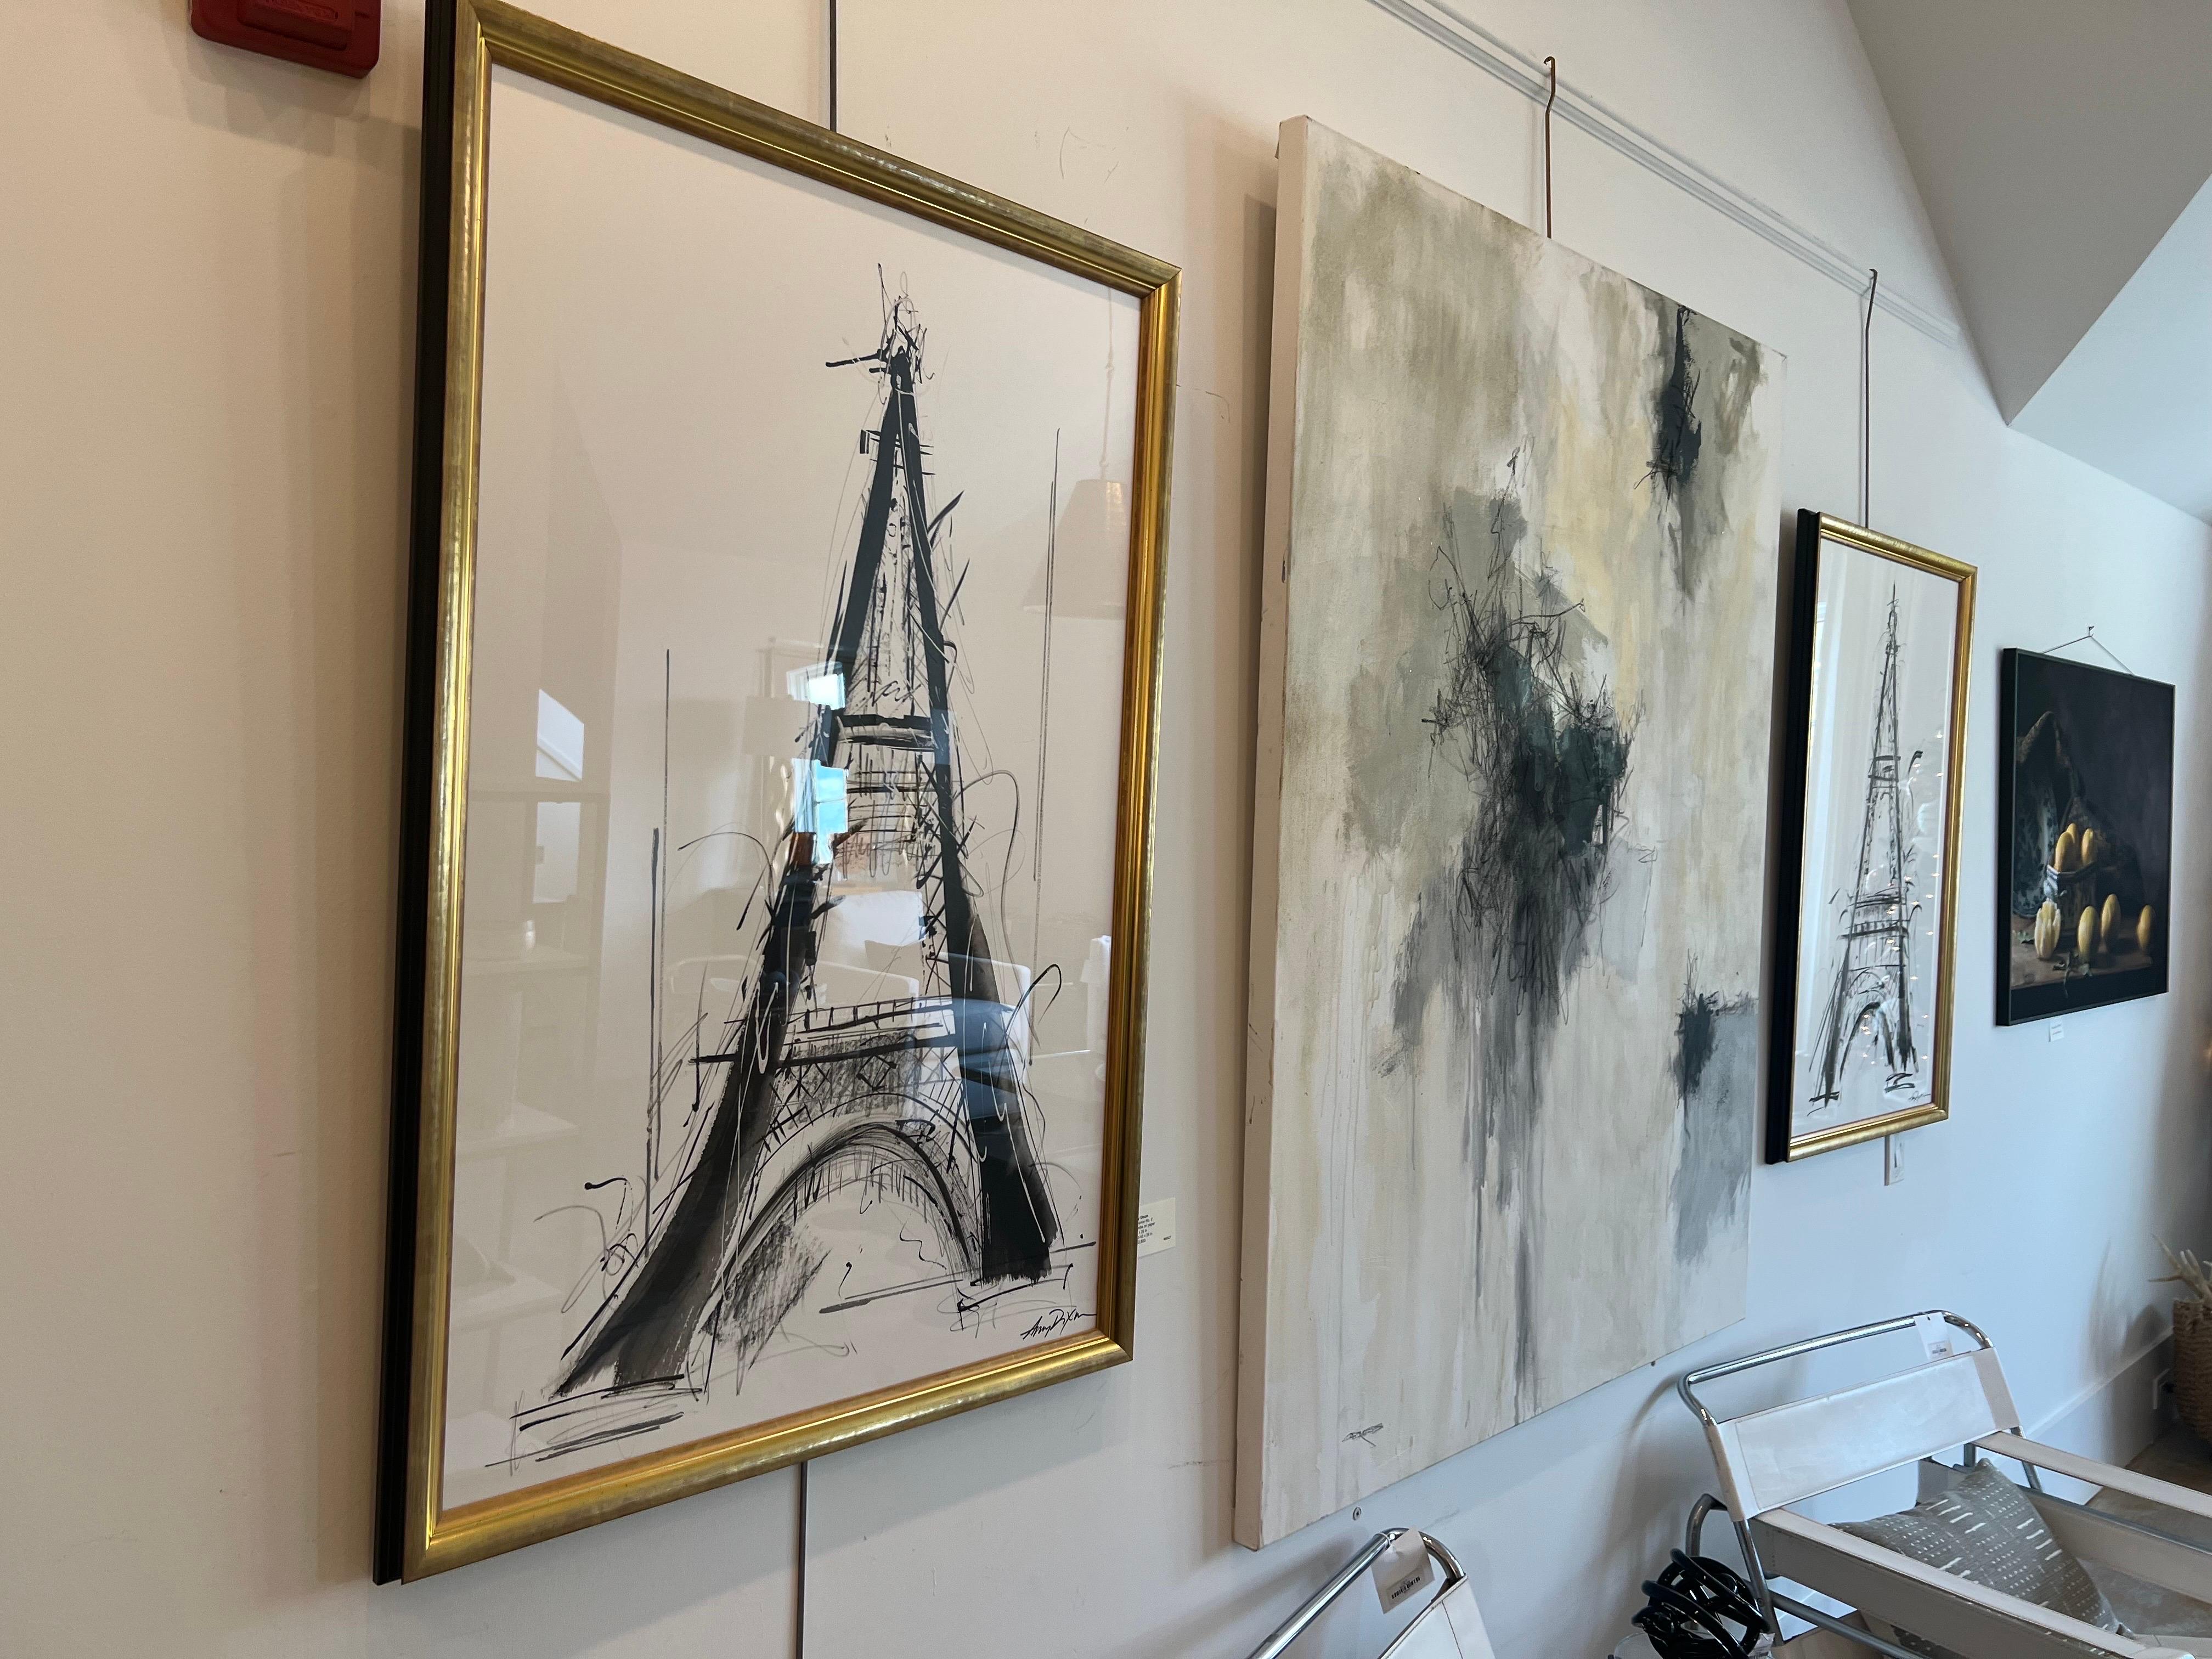 Eiffel Dance No. 2 by Amy Dixon, Framed Abstract Eiffel Tower Painting on Paper 3